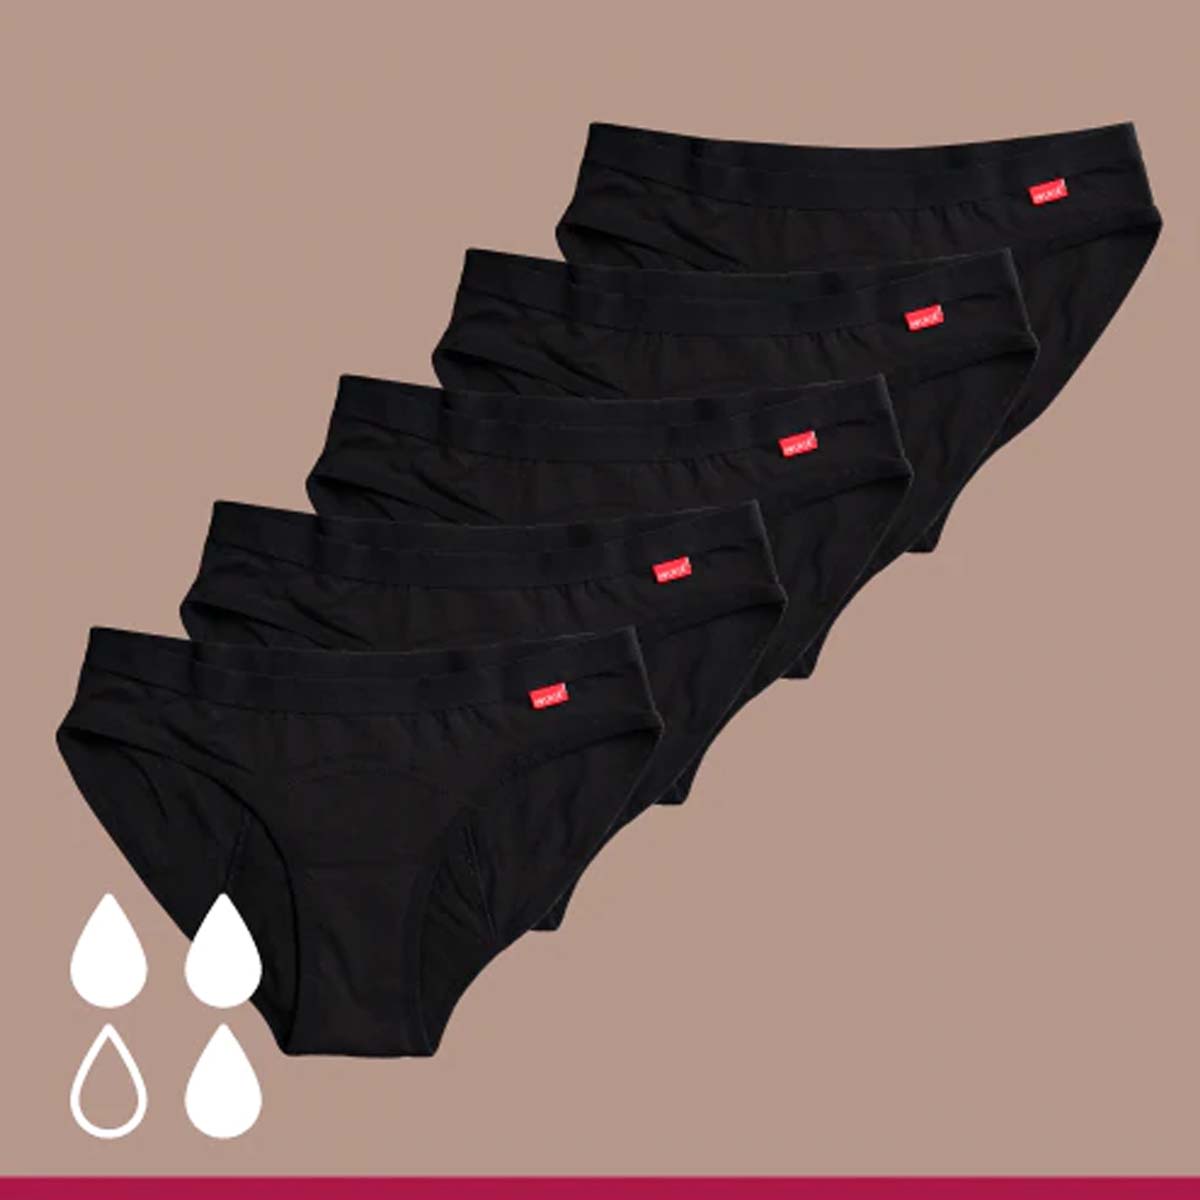 Period pants 101: How to wash them & best brands in Singapore